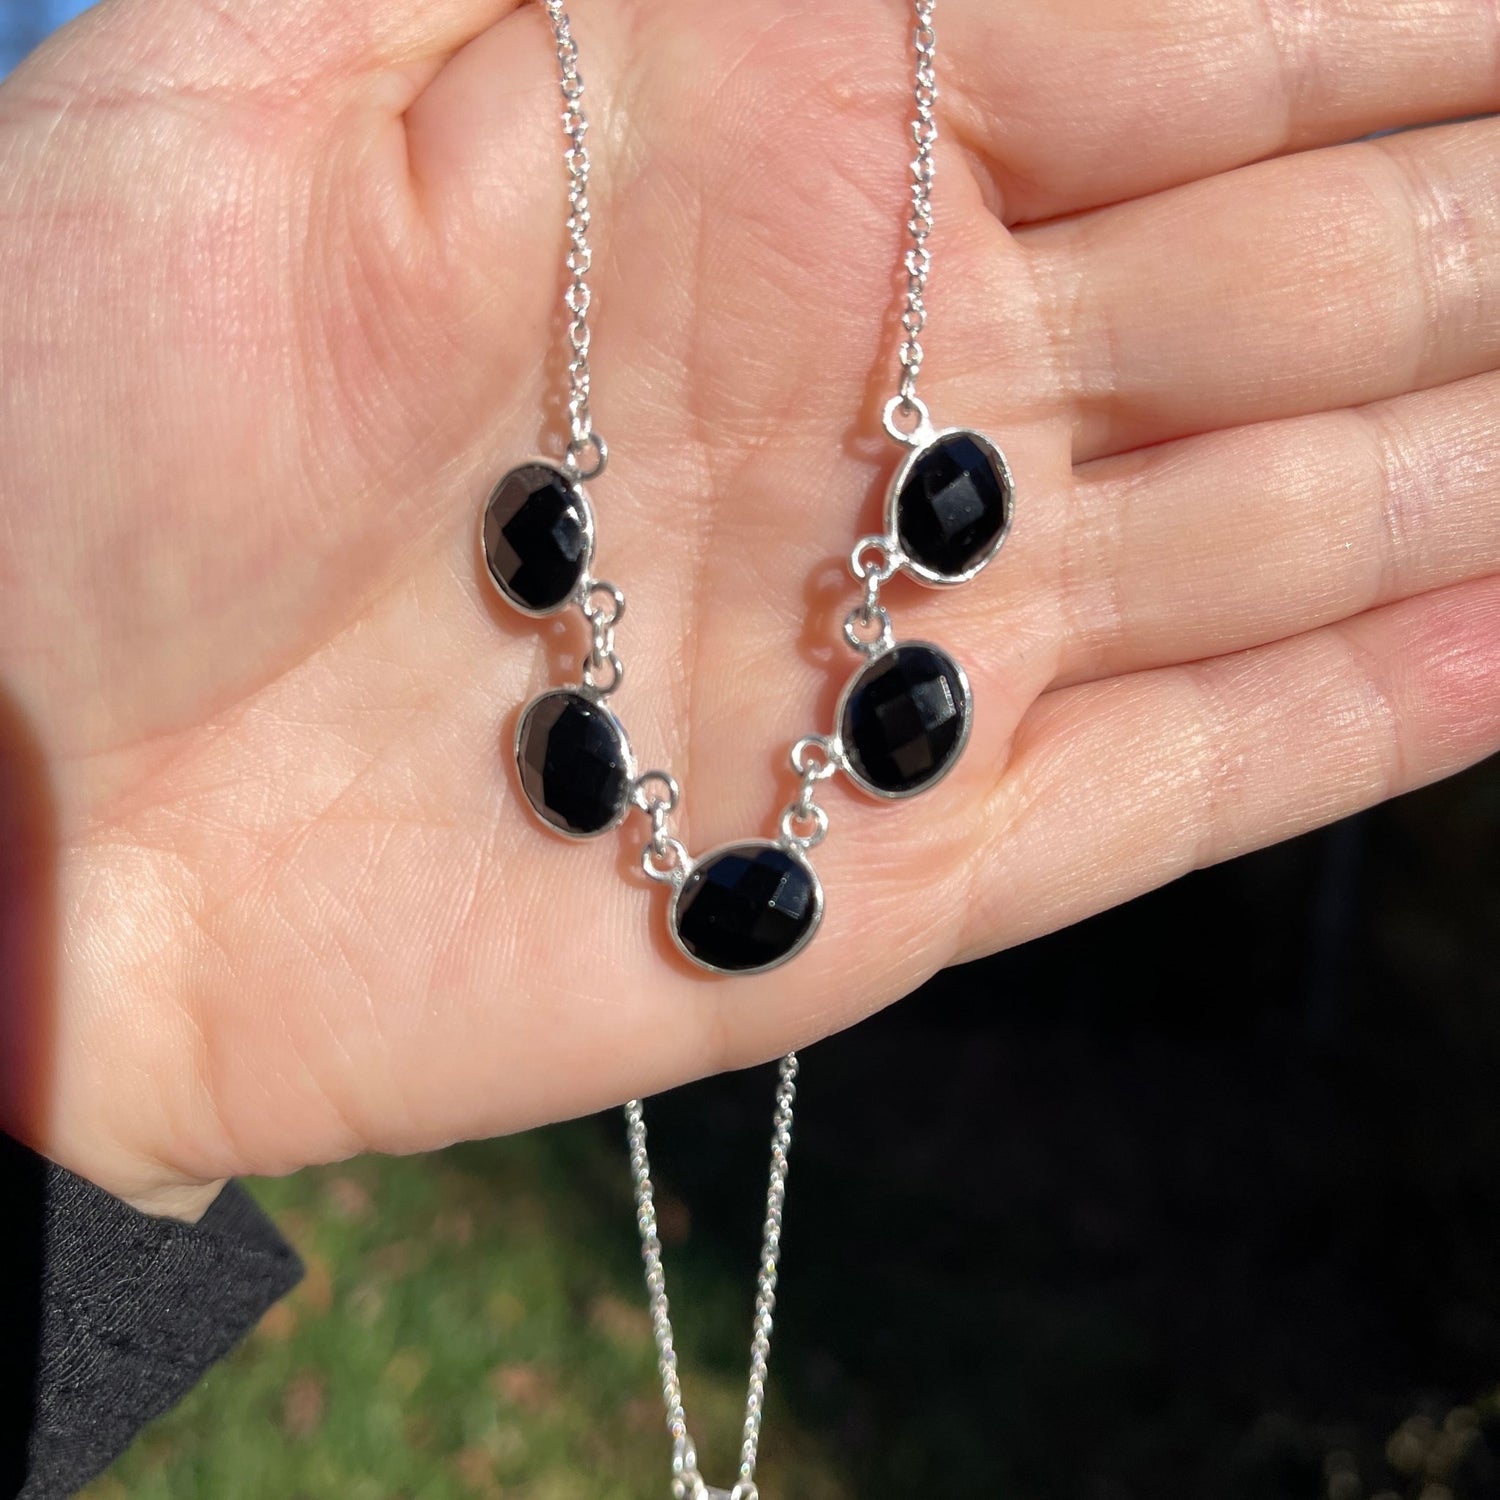 Faceted Gemstone Necklace - Onyx - Healing Stone Beings